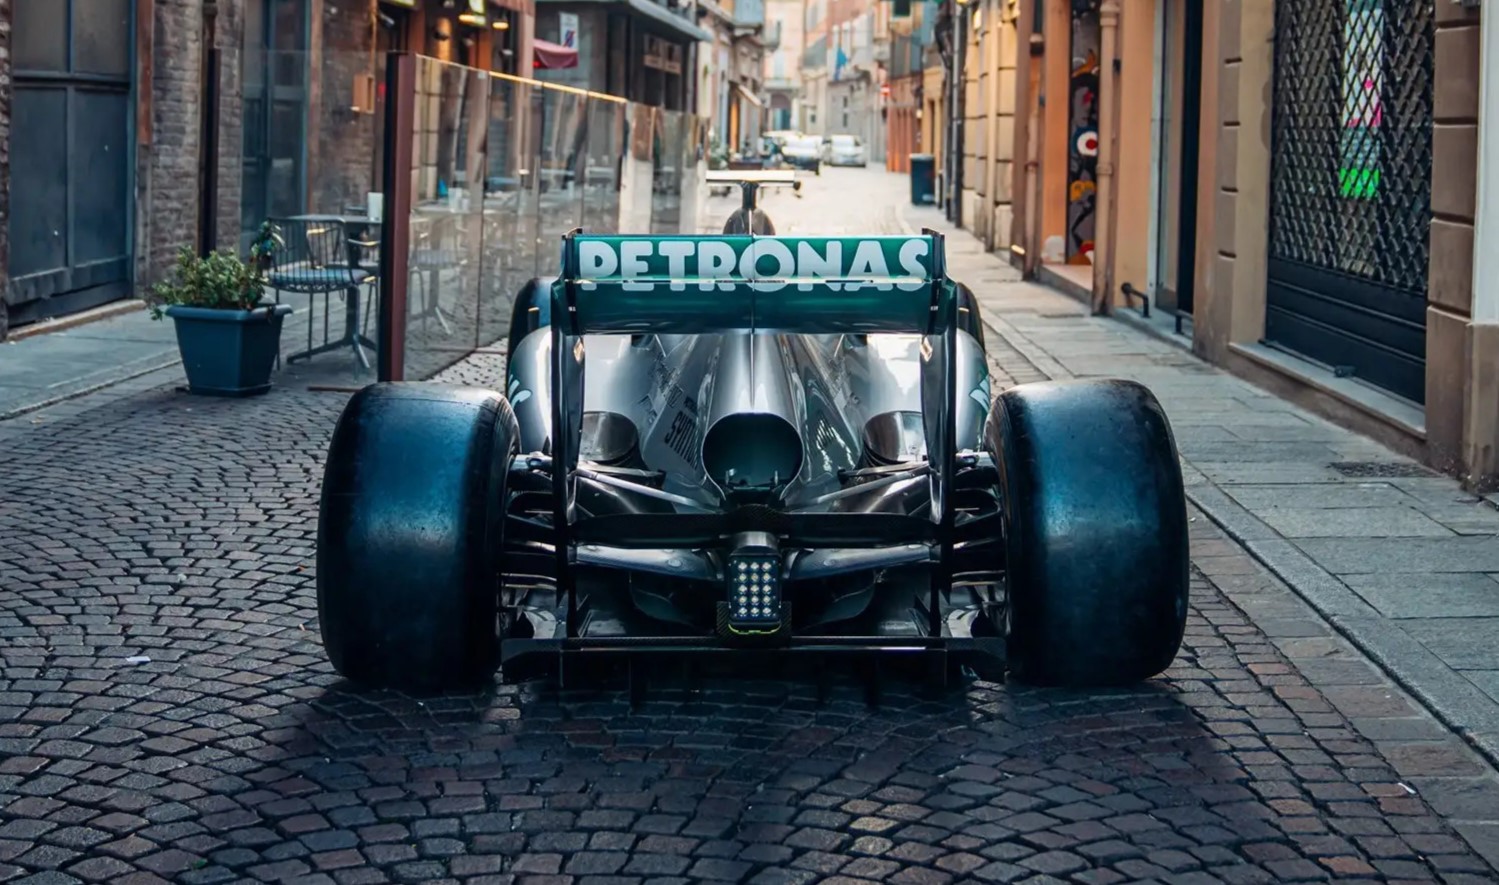 formula 1, lewis hamilton, mercedes-amg petronas, mercedes-benz, rm sotheby’s, the f1 car lewis hamilton drove in his first win for mercedes is going on auction